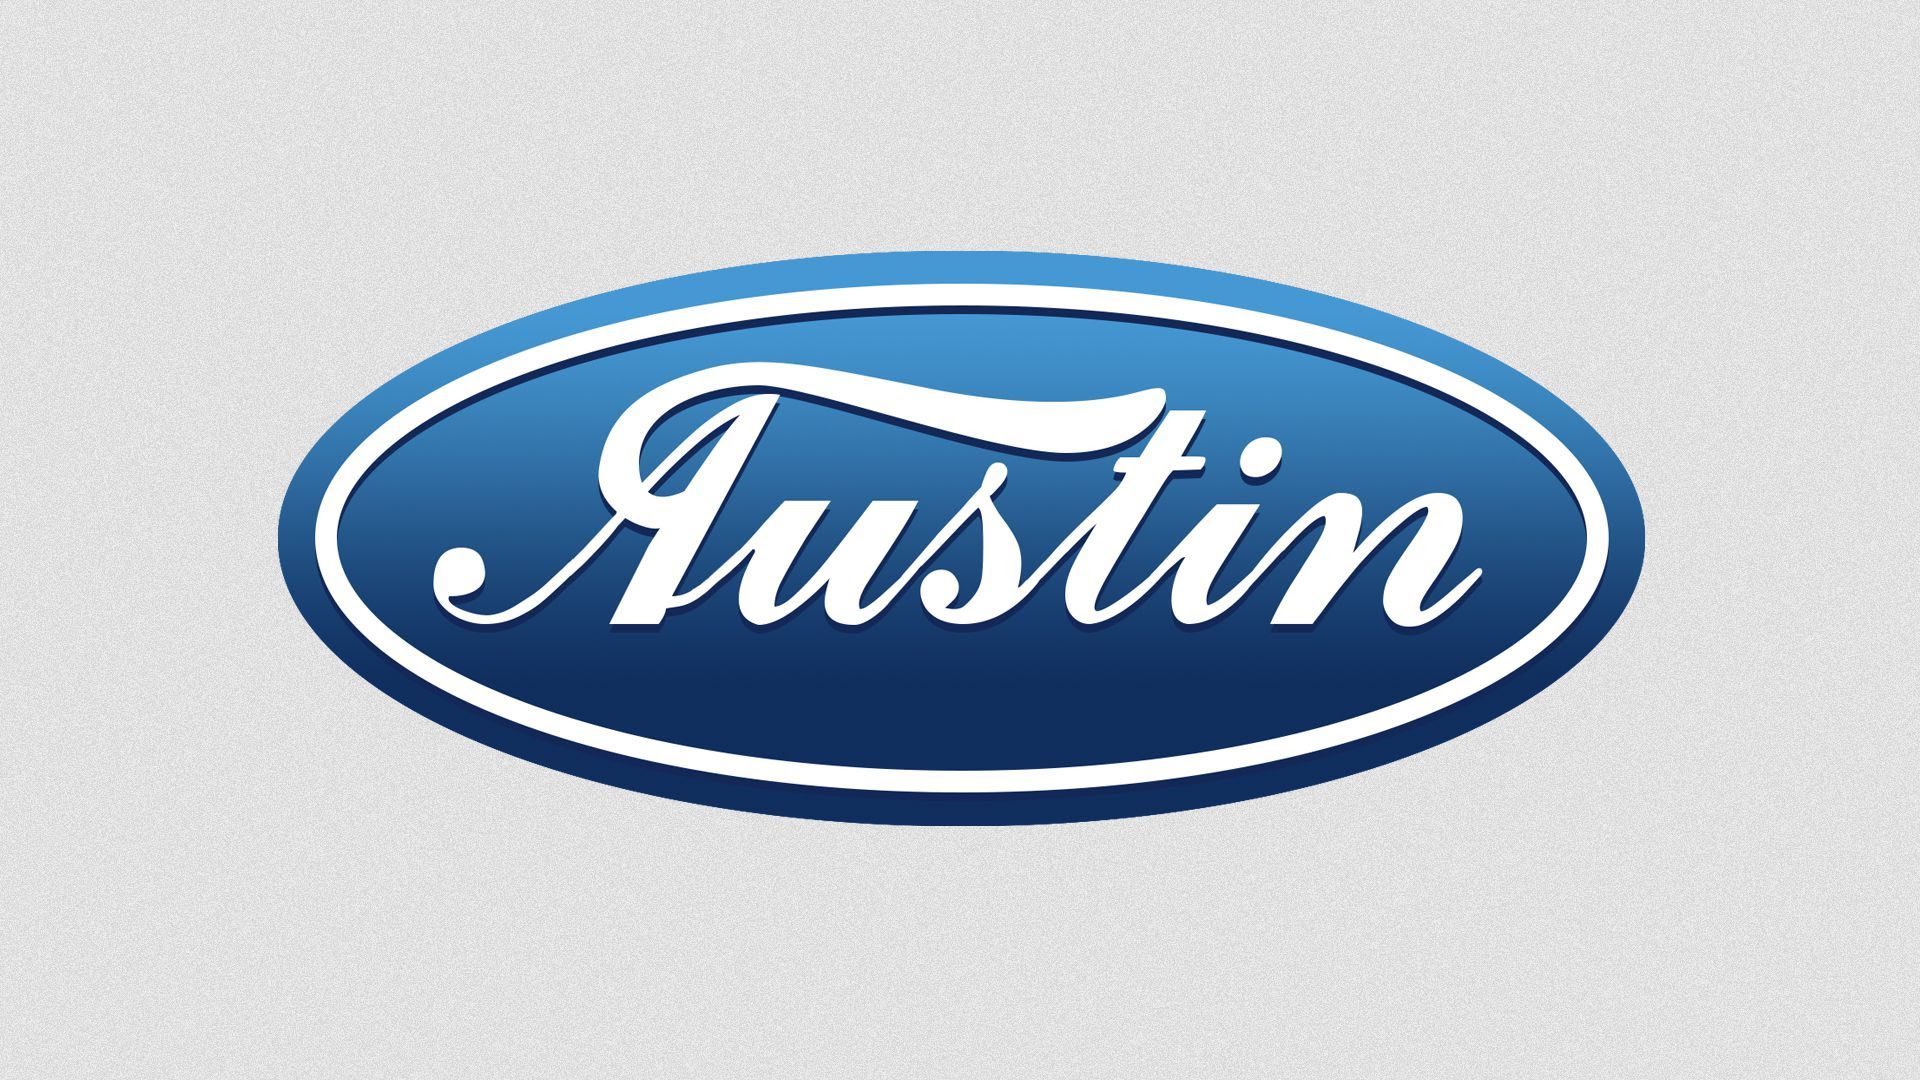 An illustration of the word Austin styled as the Ford logo